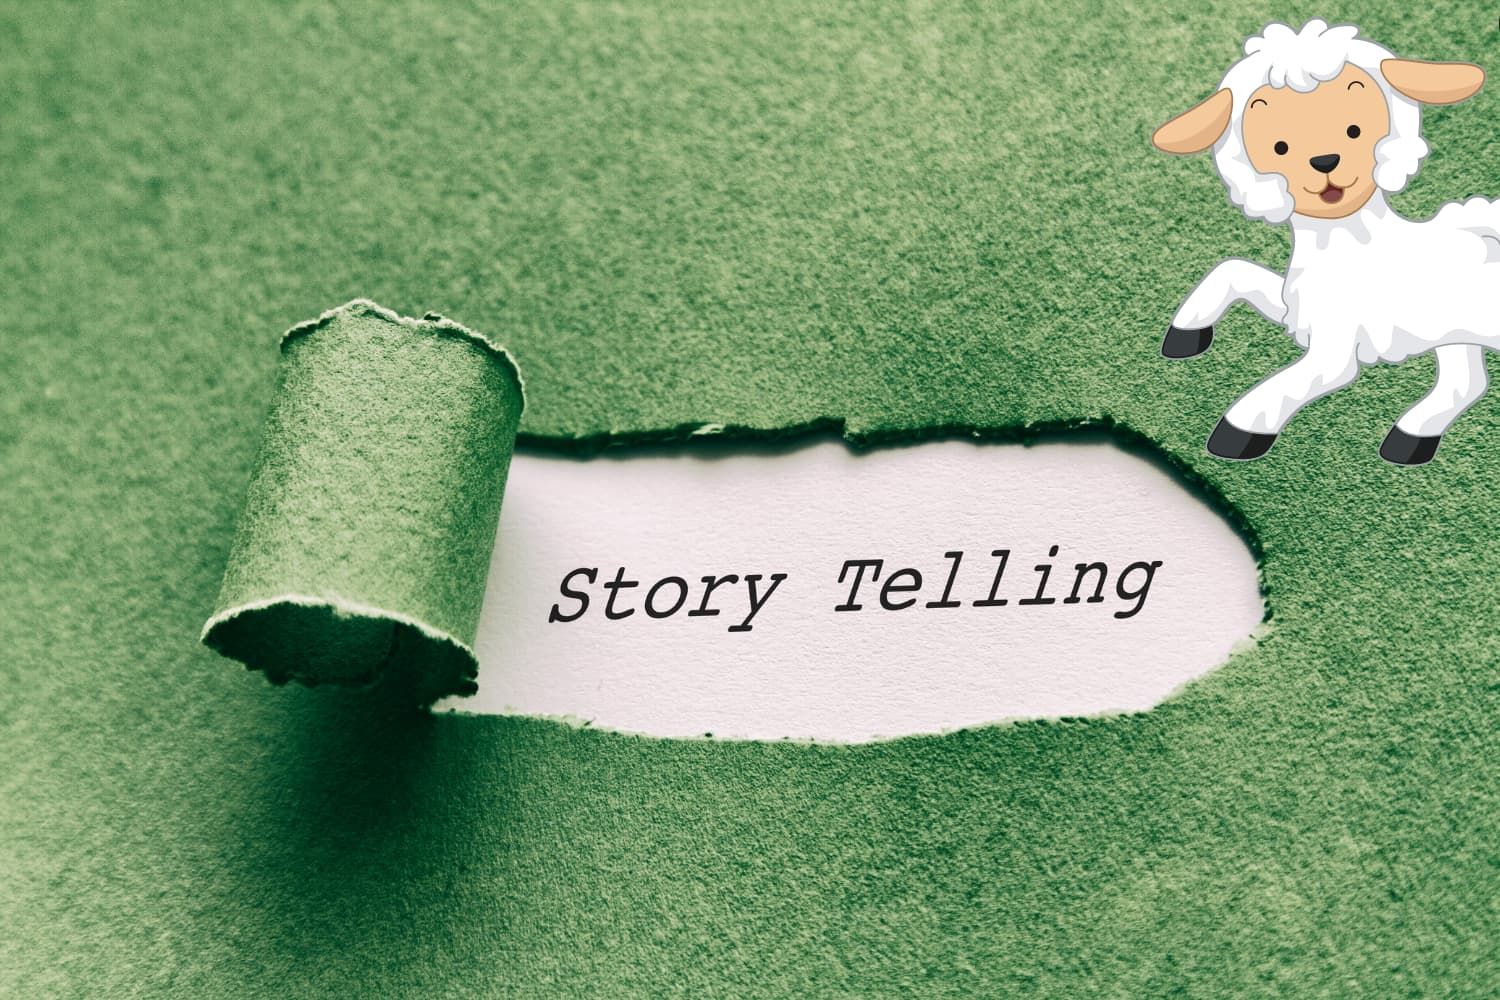 Storytelling%20tips%20-%20NT%20Parable%20of%20the%20lost%20sheep%20-%20Four%20tips%20to%20help%20you%20tell%20the%20story-0b70d295 Sheep / shepherd